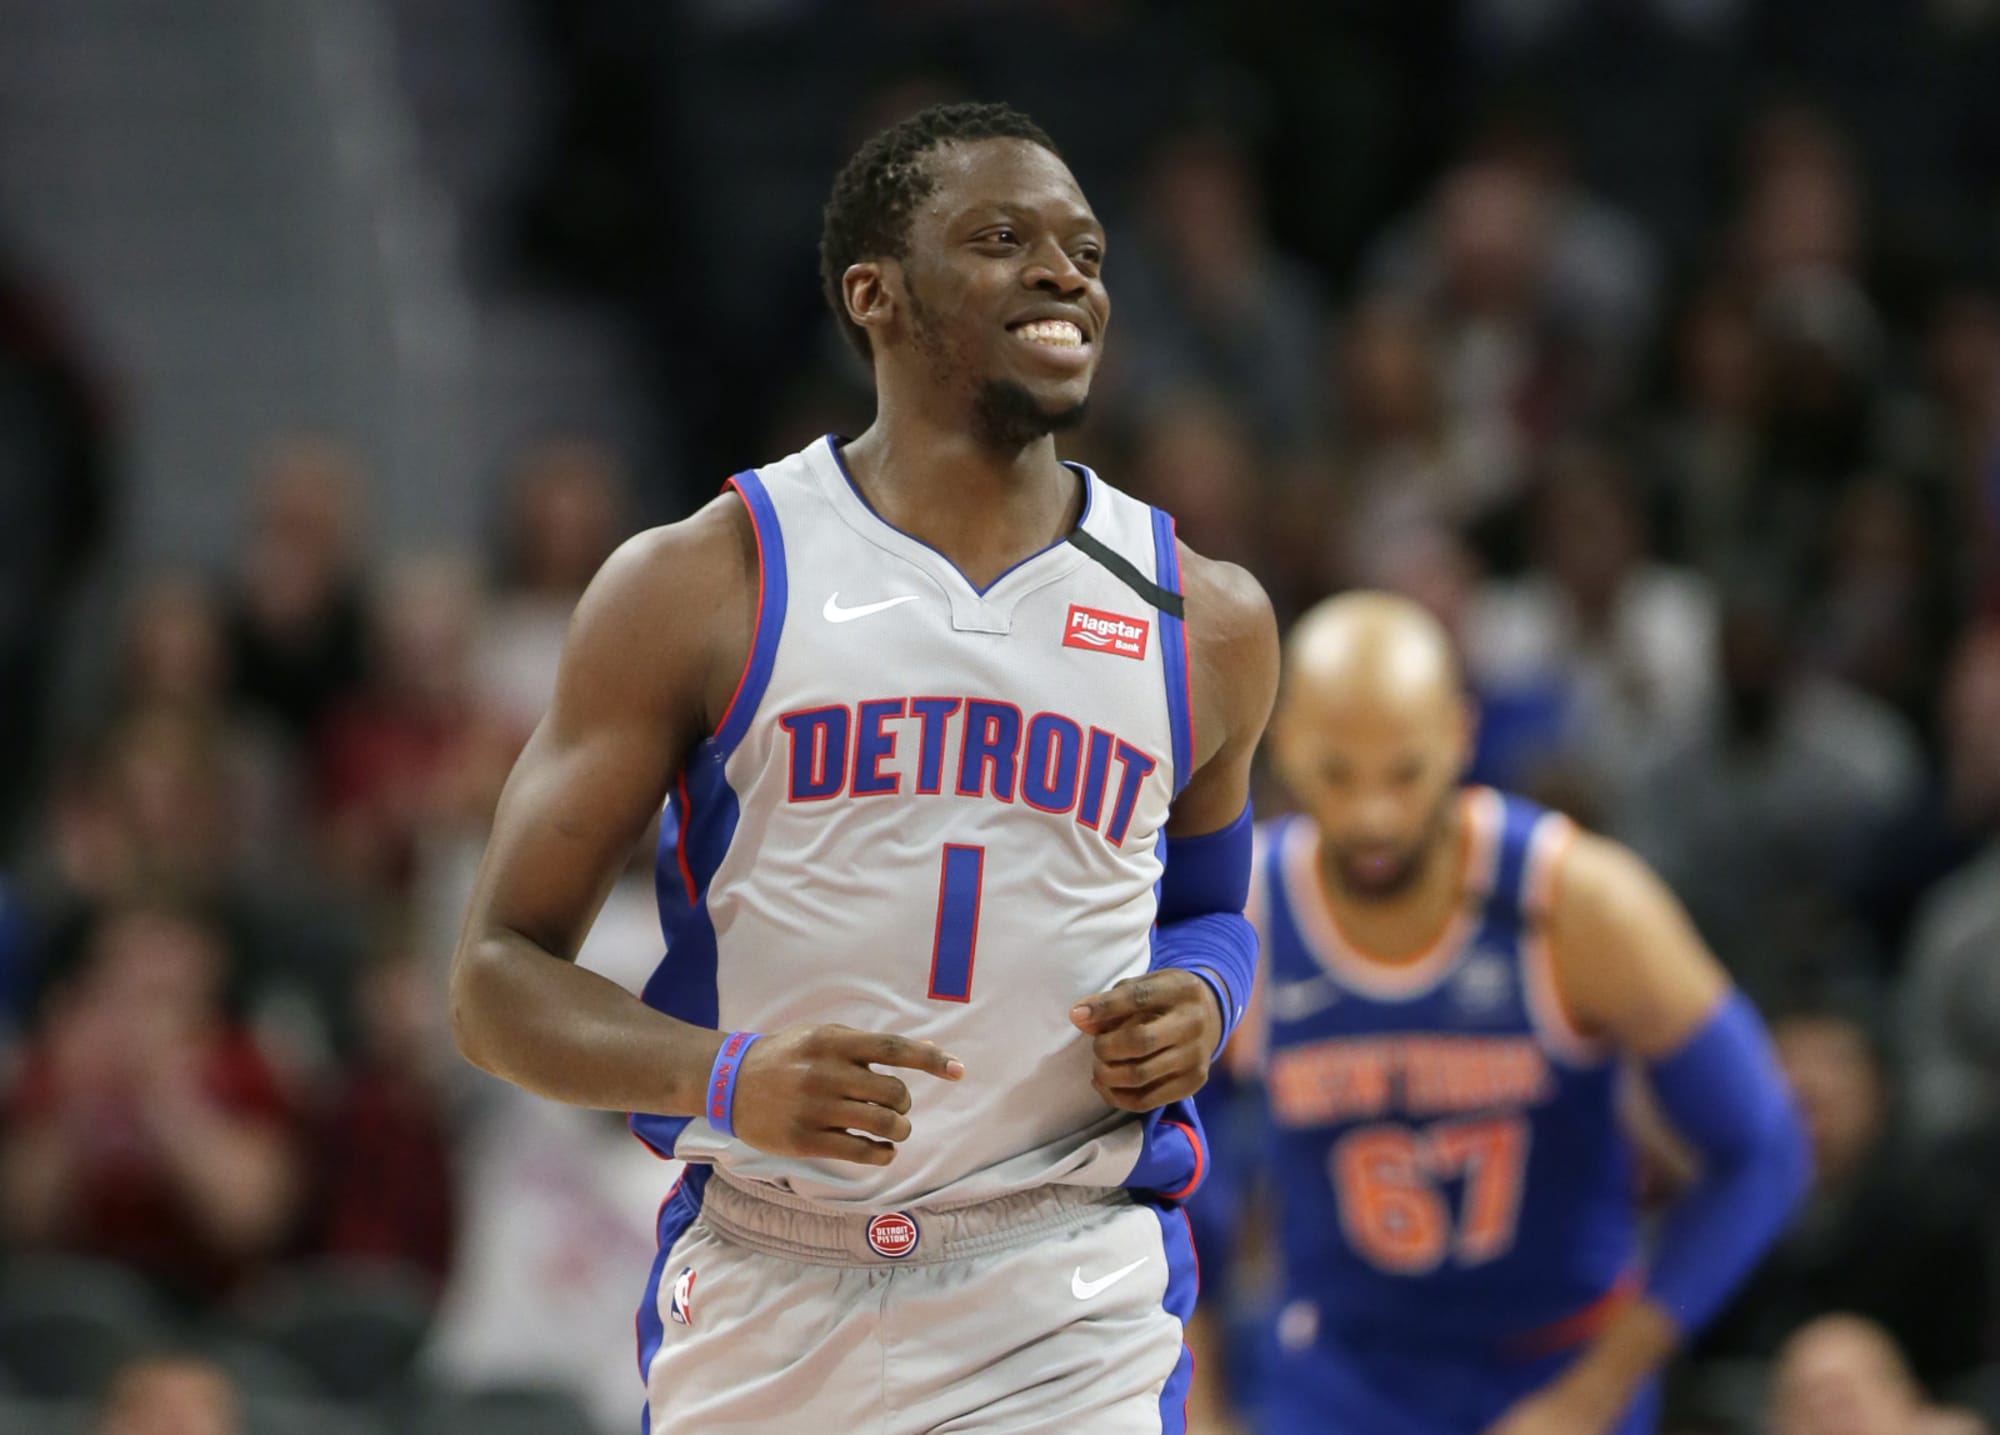 Reggie Jackson officially re-signs with Clippers